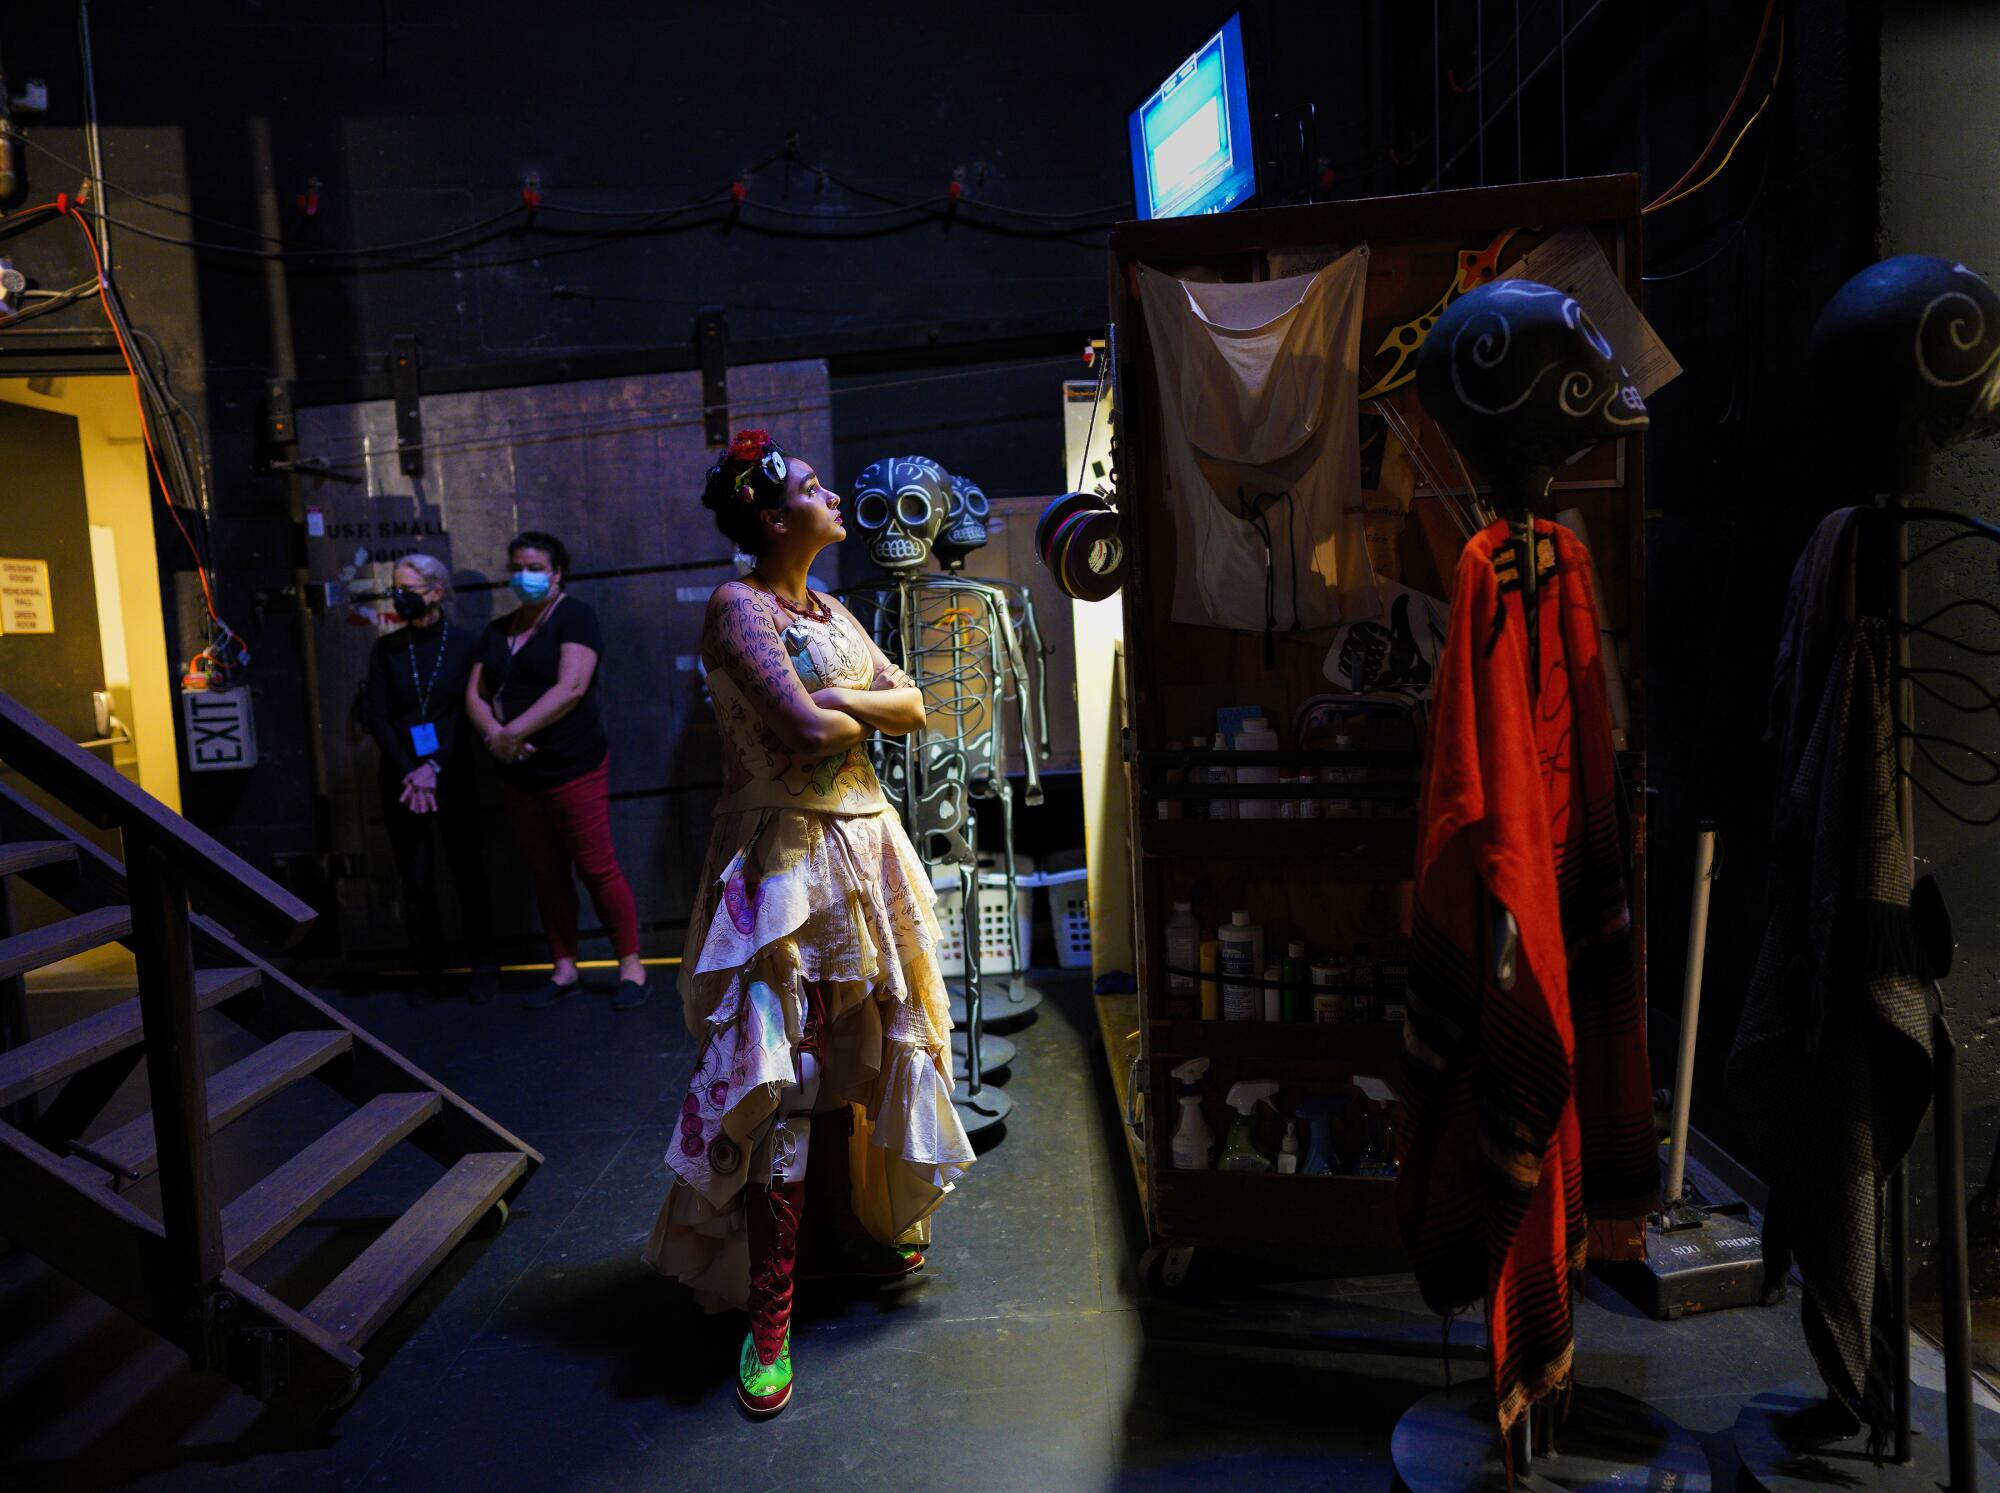 A cast member watched on the back stage monitor.